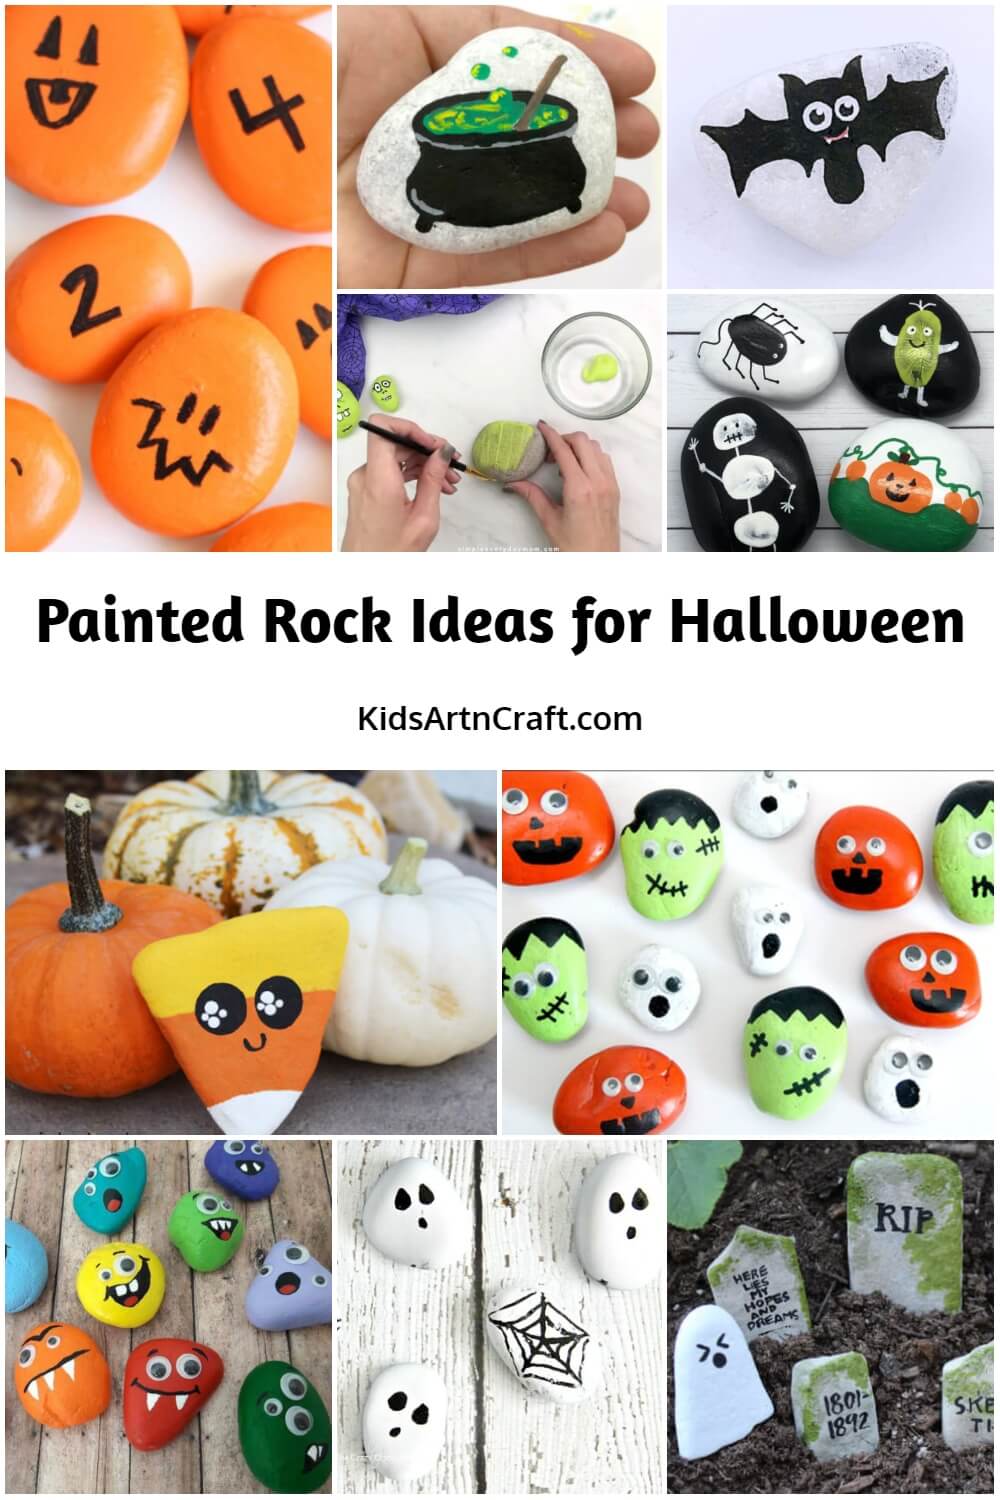 Painted Rock Ideas for Halloween